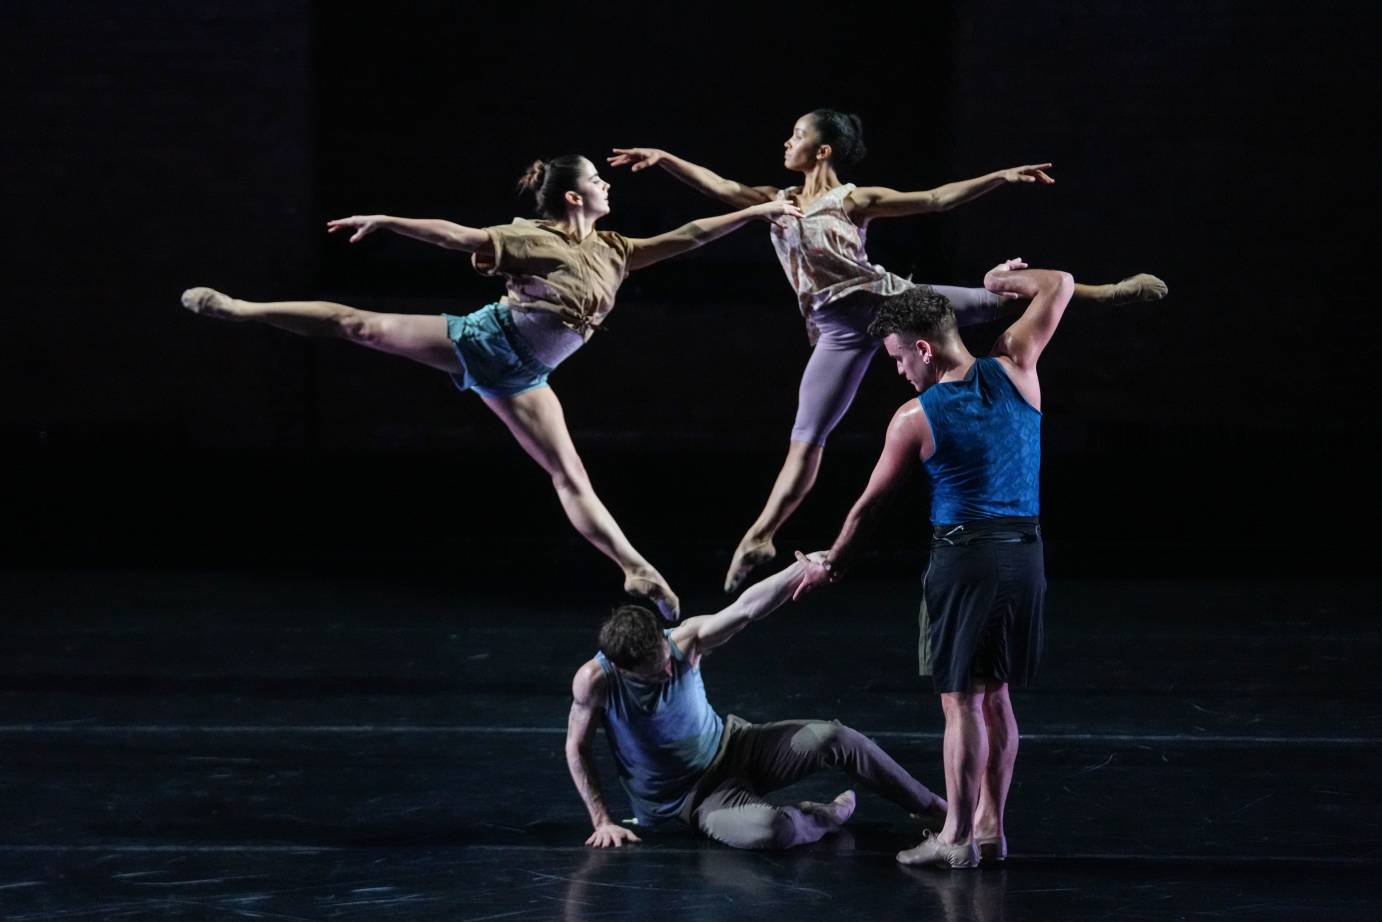 2 dancers jumping behind a crouched dancer in the foreground. A standing dancer holds his hand